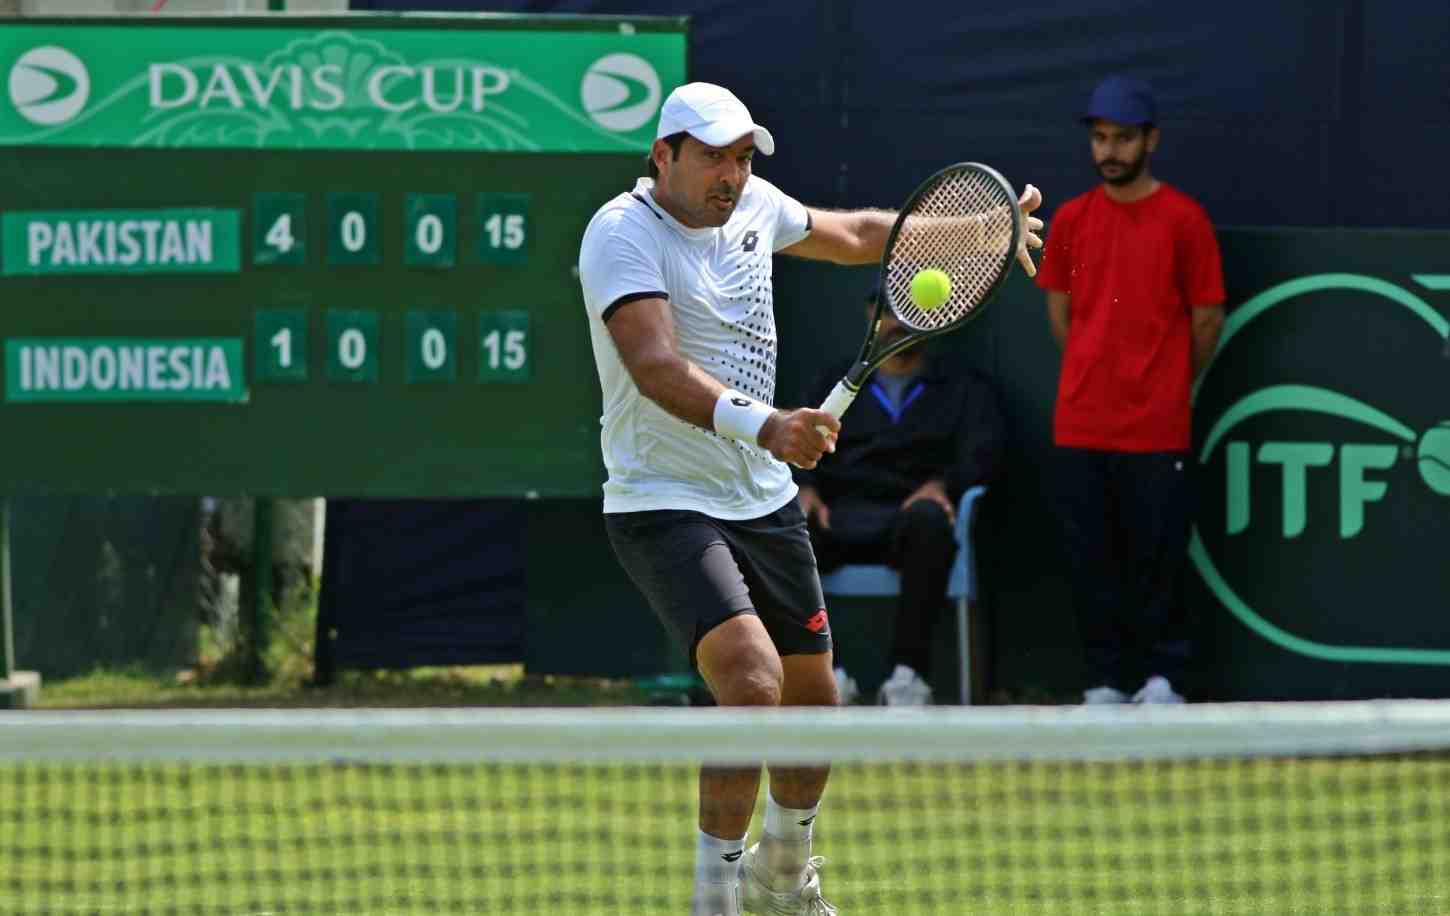 Davis Cup Tennis: Aisam & Aqeel give 2-0 lead to Pakistan against Indonesia